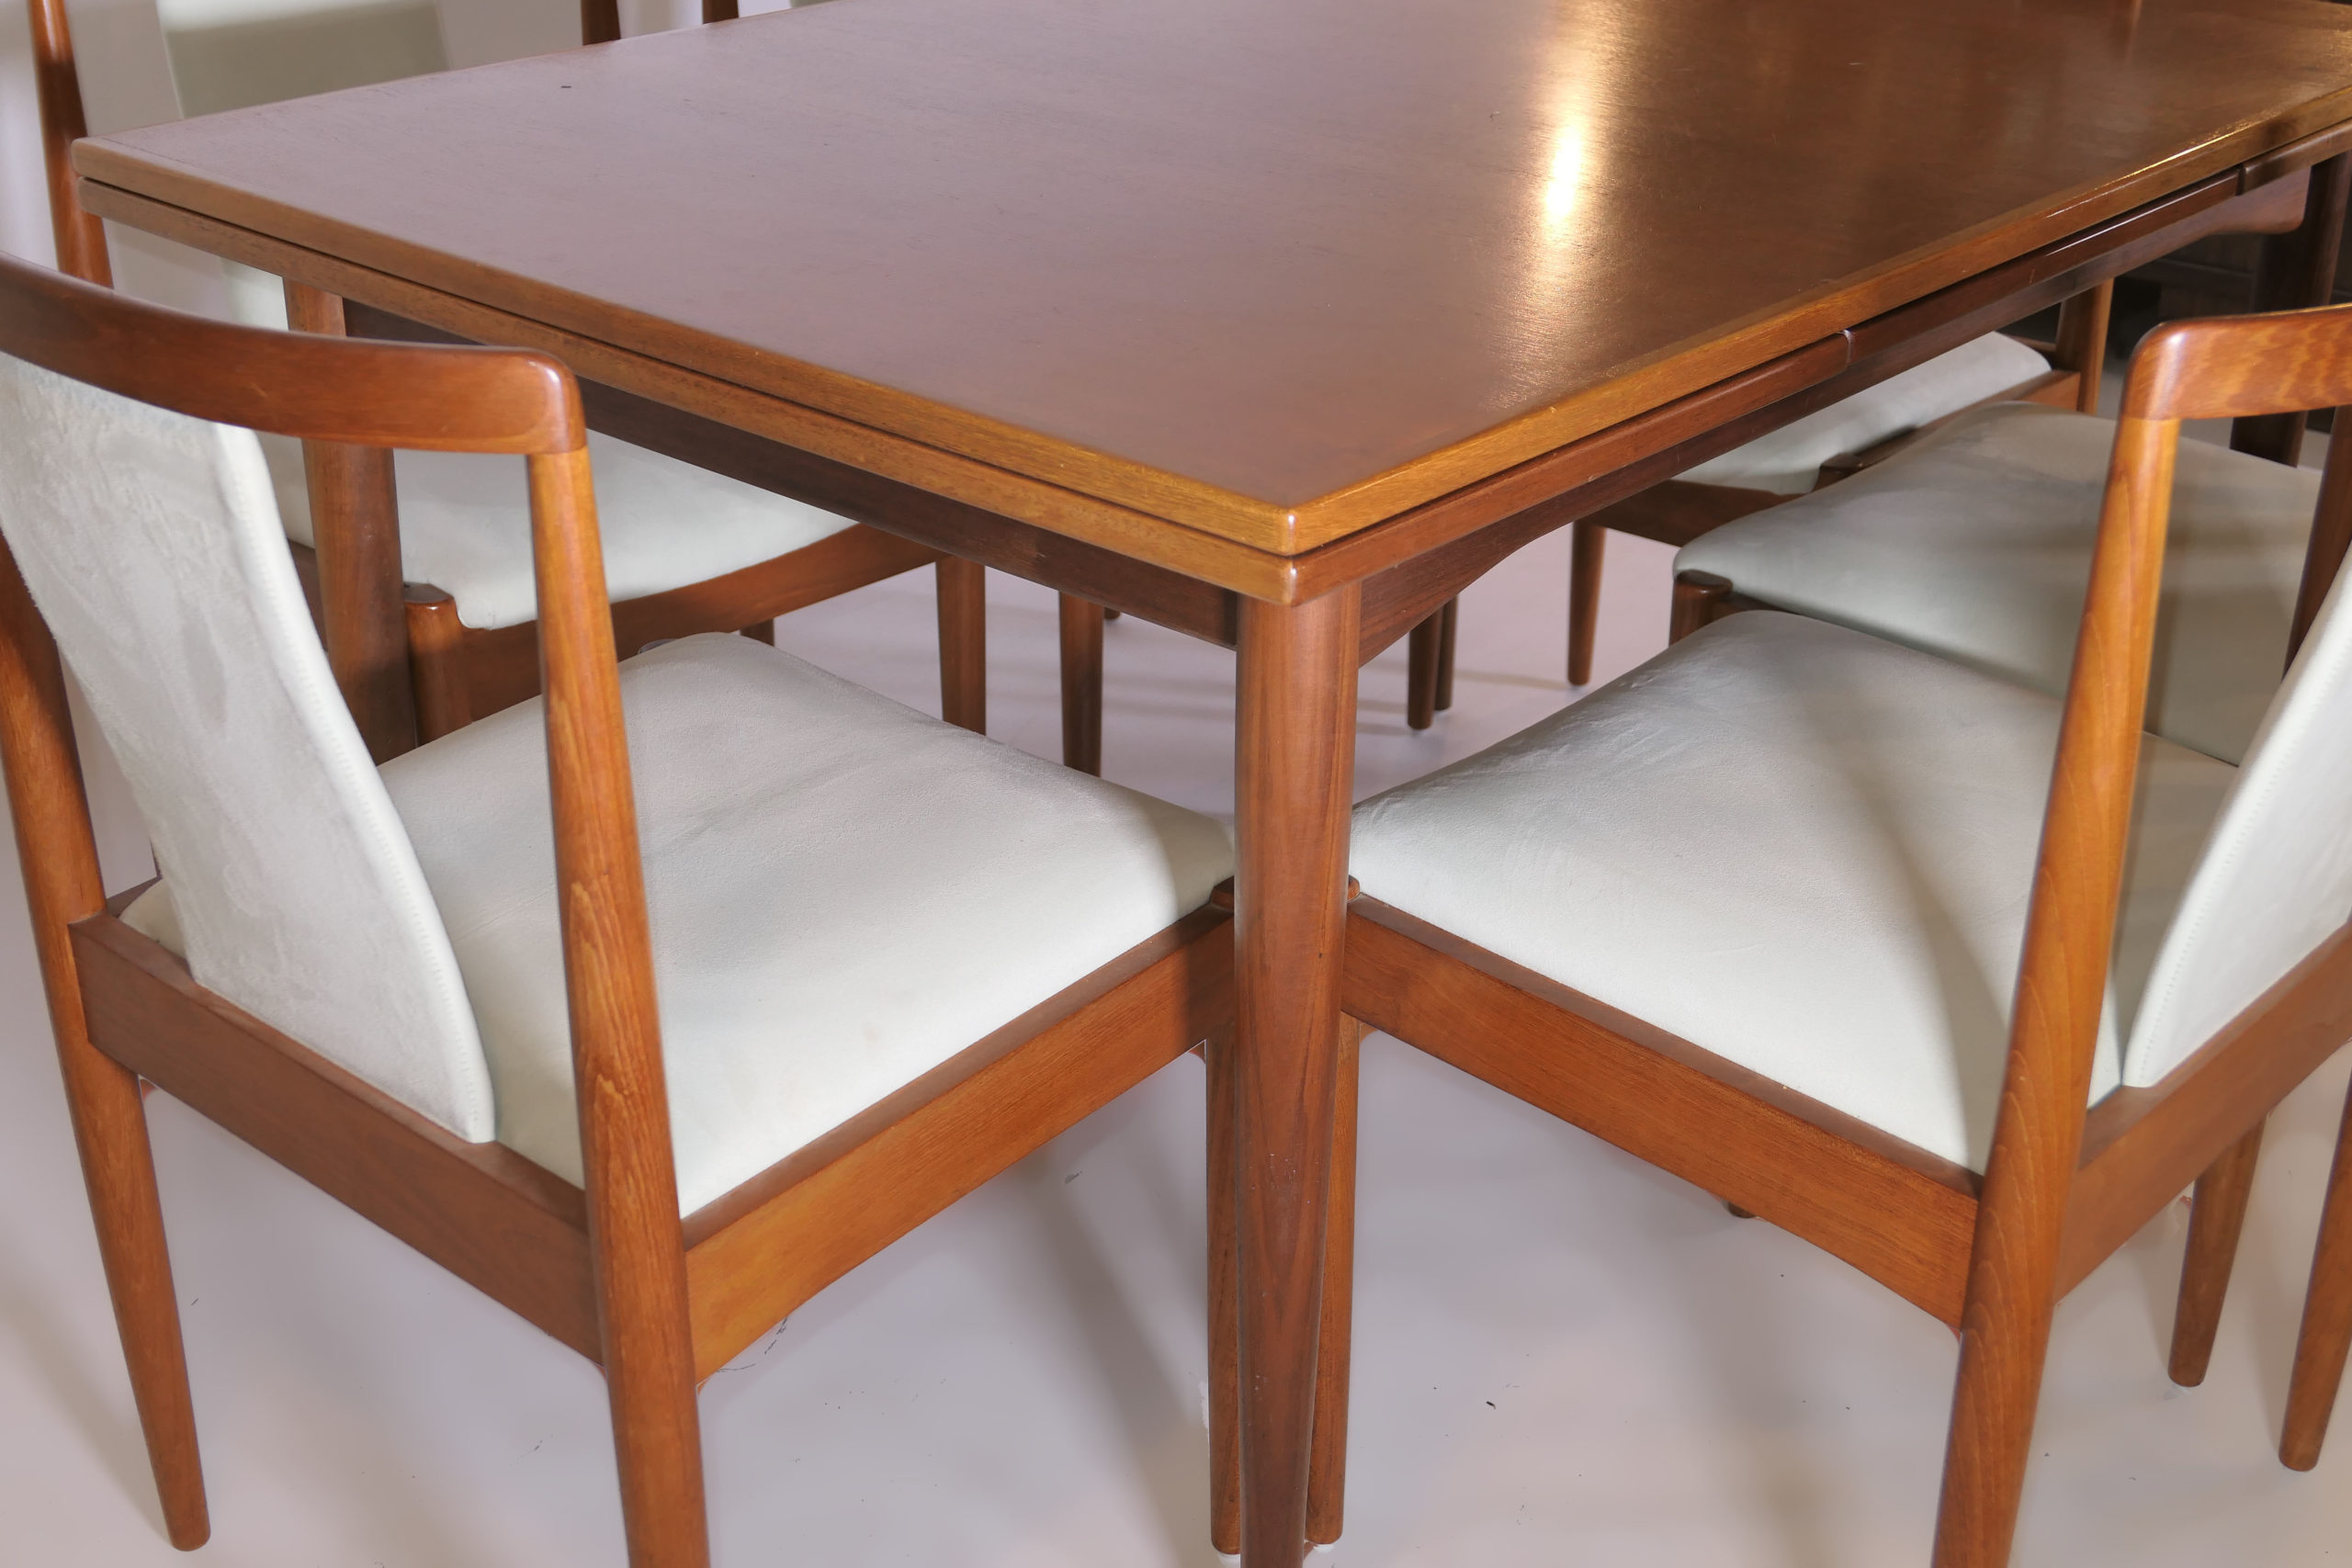 Teak Dining Table With Storage: Practical And Stylish